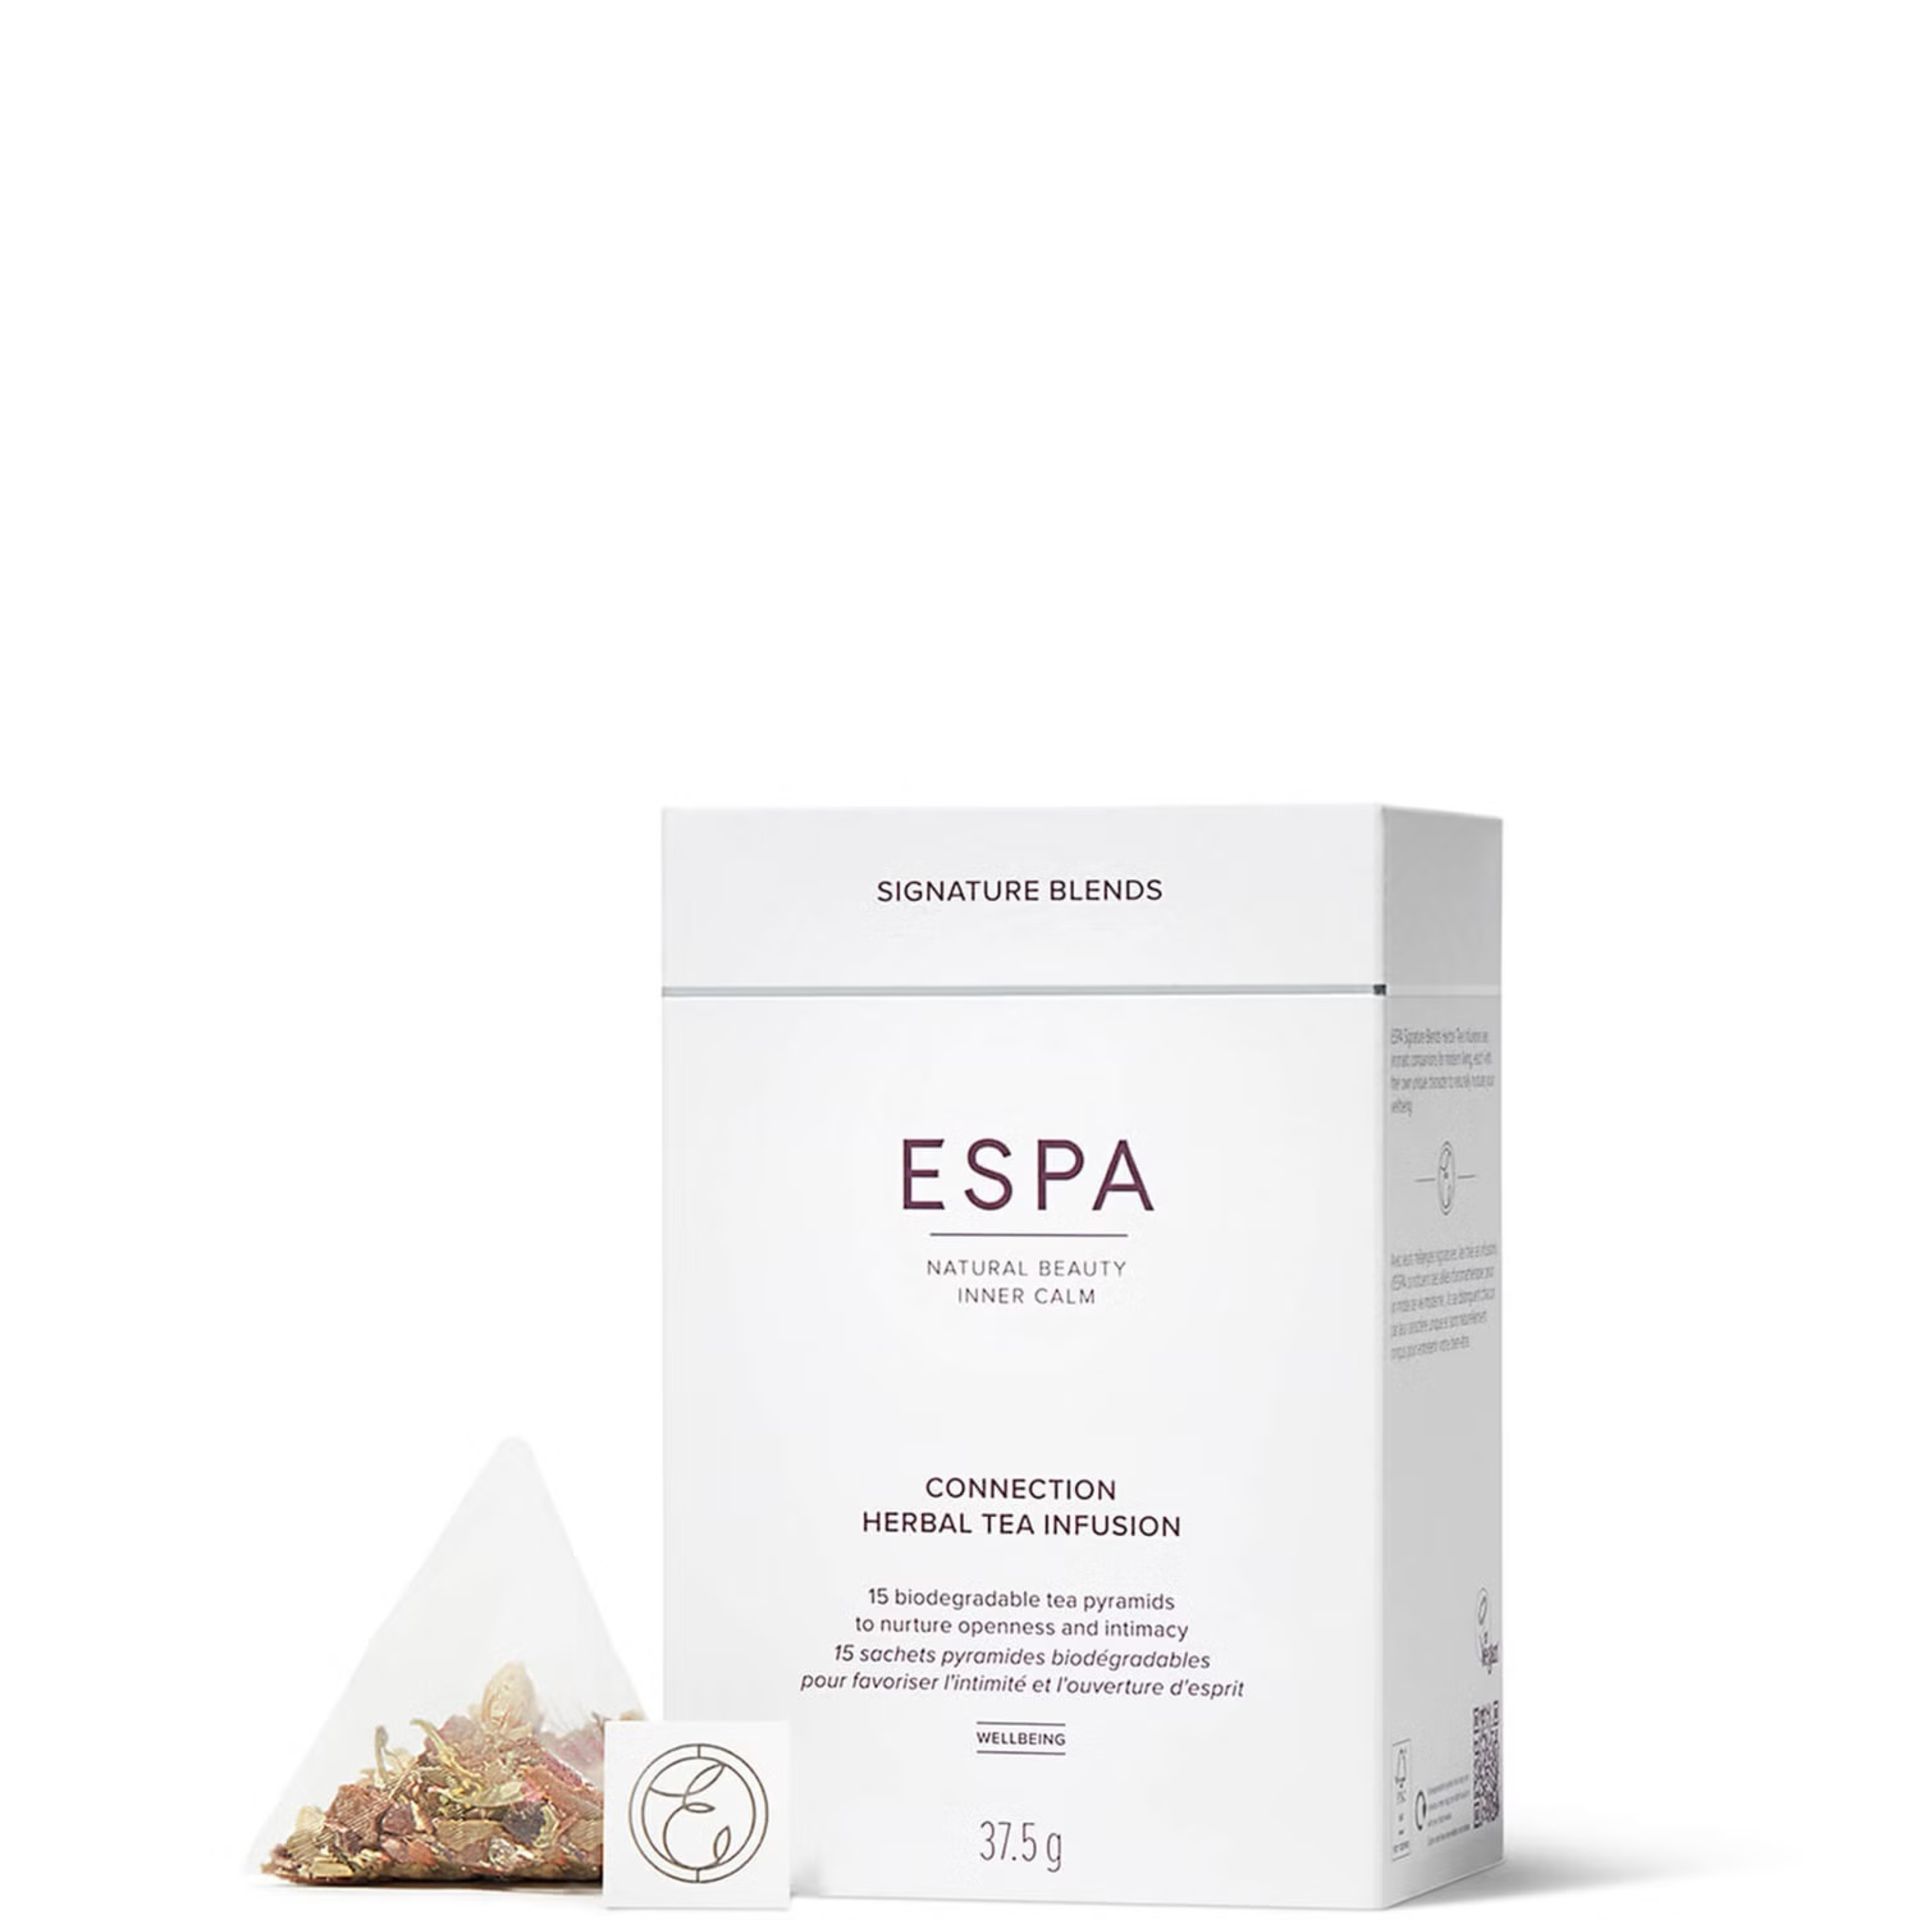 20x NEW & BOXED ESPA Connection Herbal Tea Infusion 37.5g. RRP £15 EACH. (EBR1/2). Our Connection